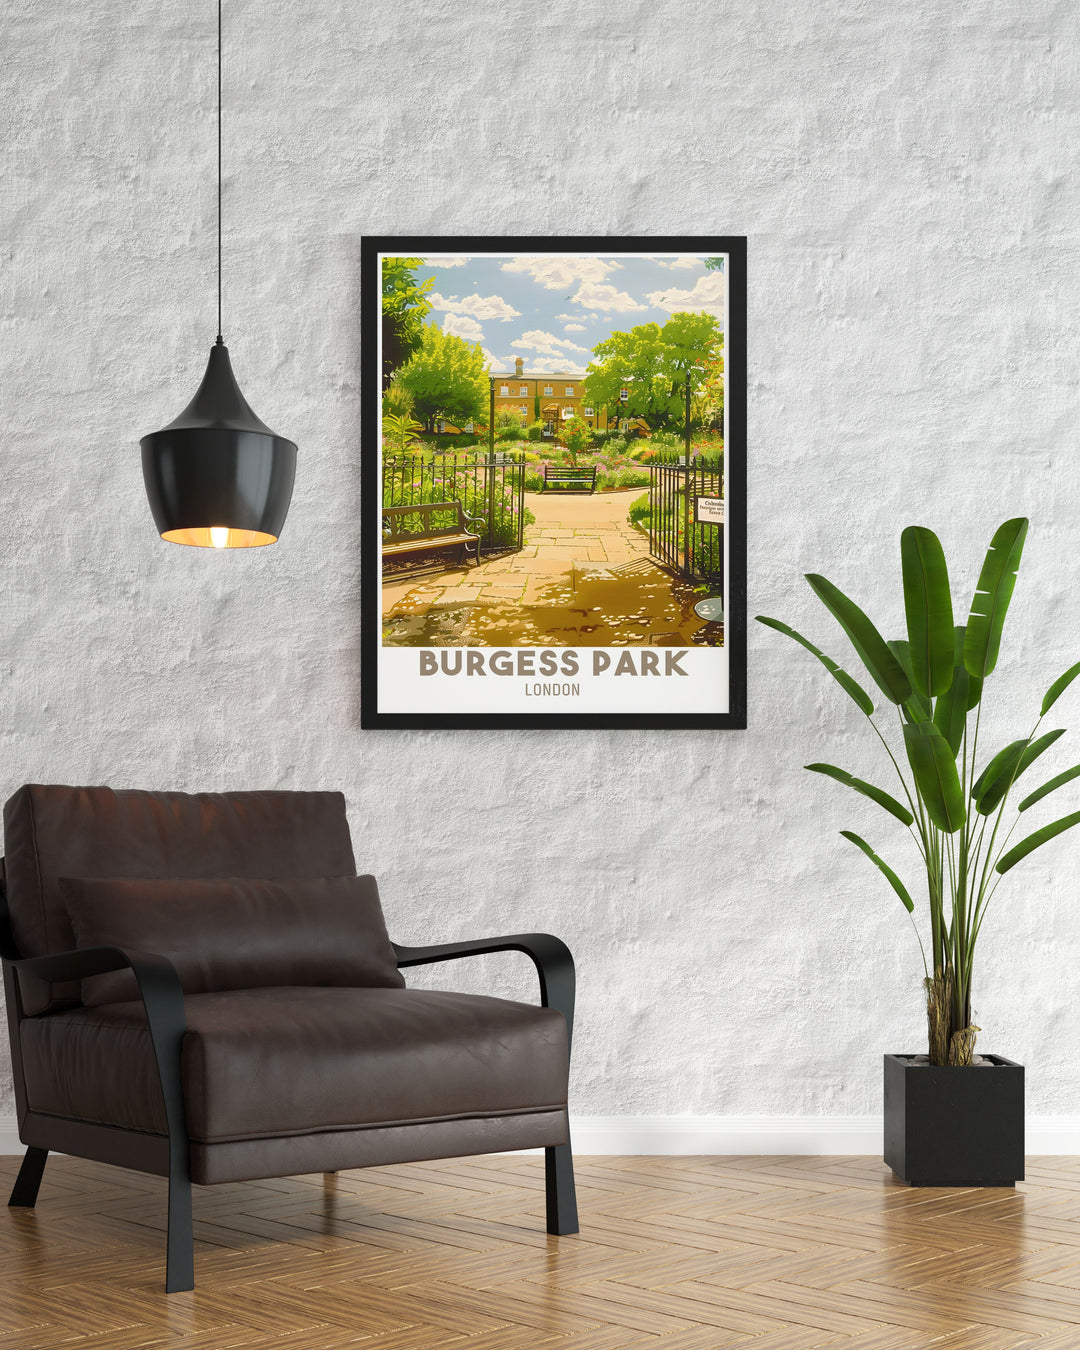 The Burgess Park London poster presents a captivating view of the parks expansive green spaces and the serene Chumleigh Gardens. The inclusion of Chumleigh Café adds a touch of local charm, making this artwork a delightful addition to any art collection.